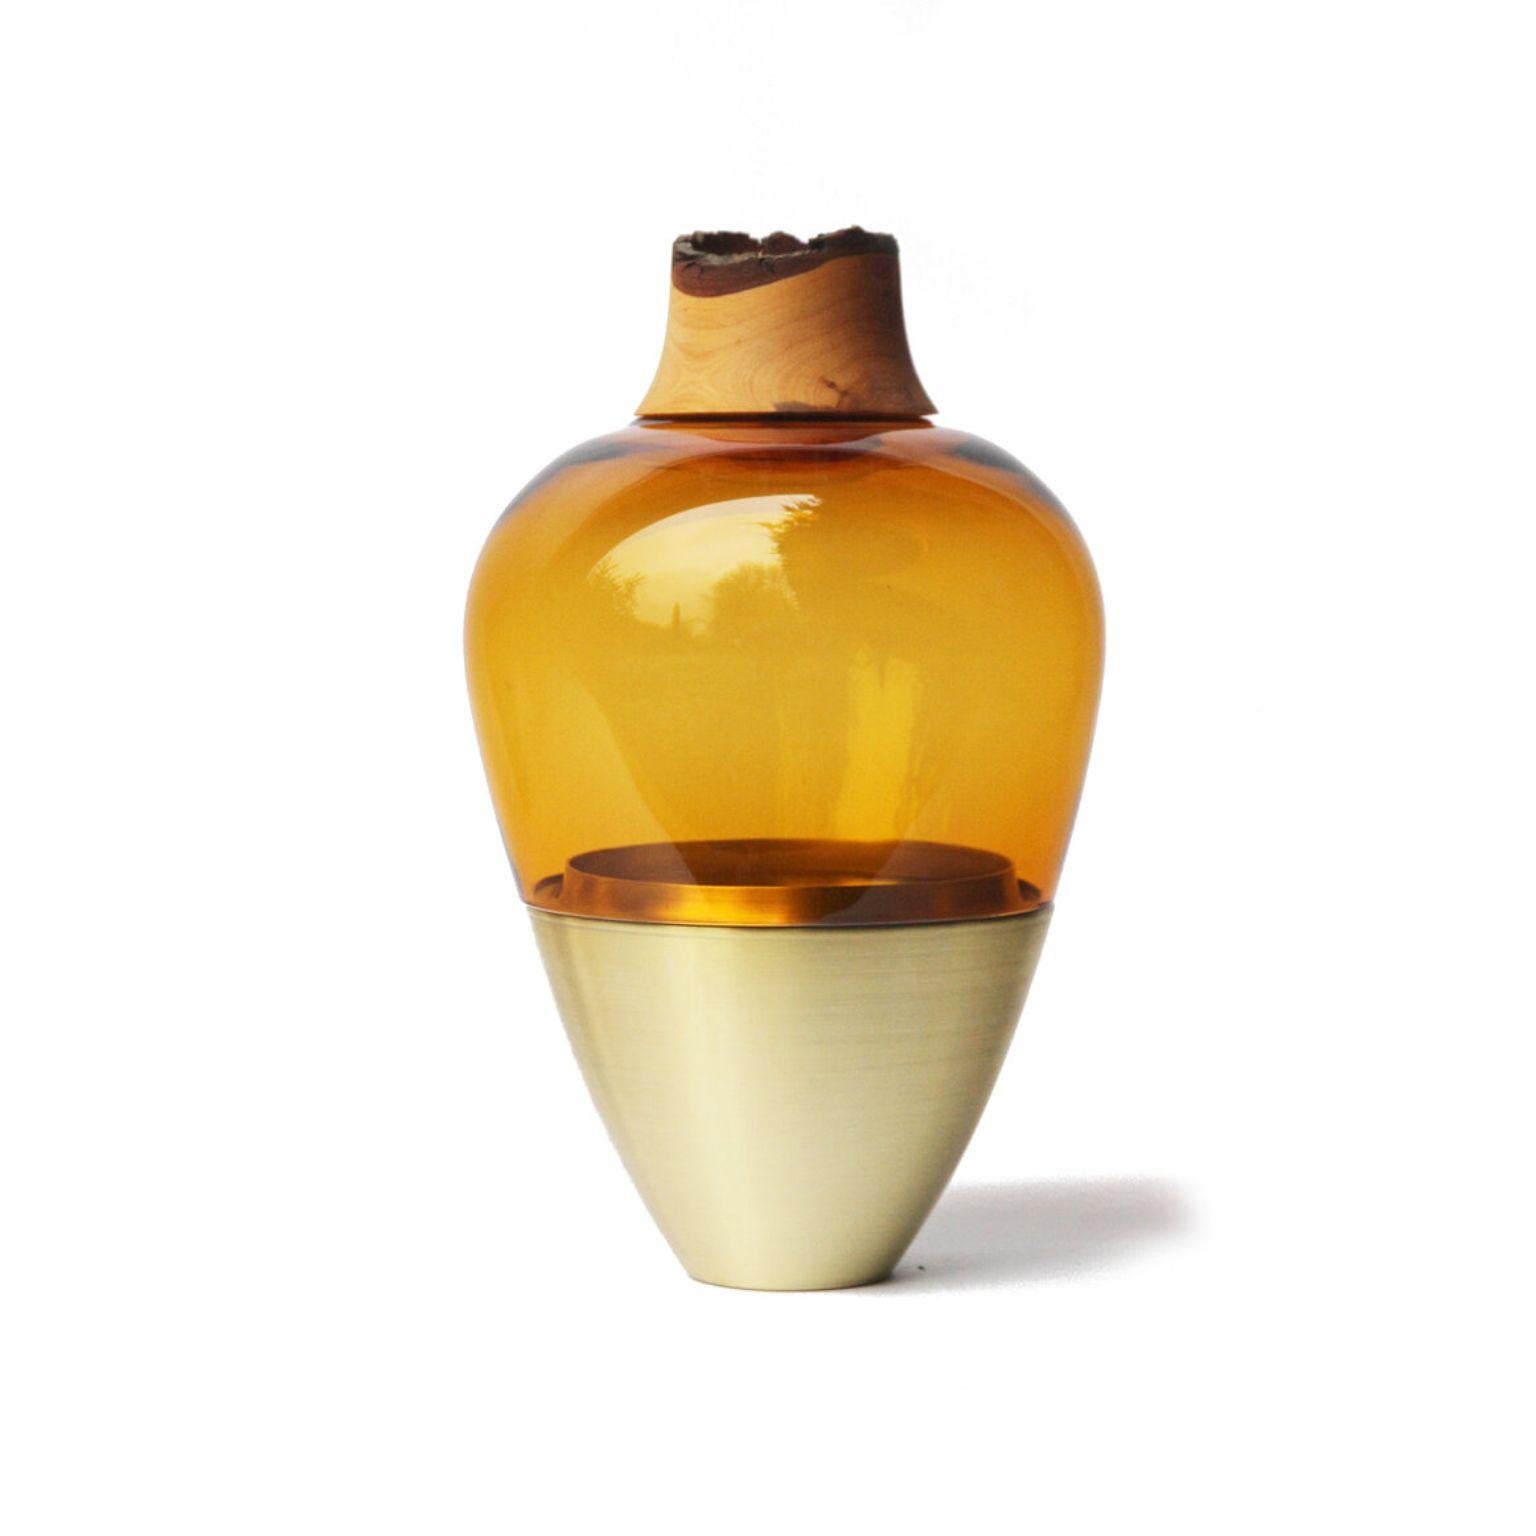 Amber and Brass Sculpted Blown Glass India Stacking Vessel, Pia Wüstenberg
Dimensions: height 20 x diameter 38cm
Materials: hand blown glass, brass

Pia Wüstenberg, Utopia
Pia Wüstenberg is a creative with a passion for materials and craft. She